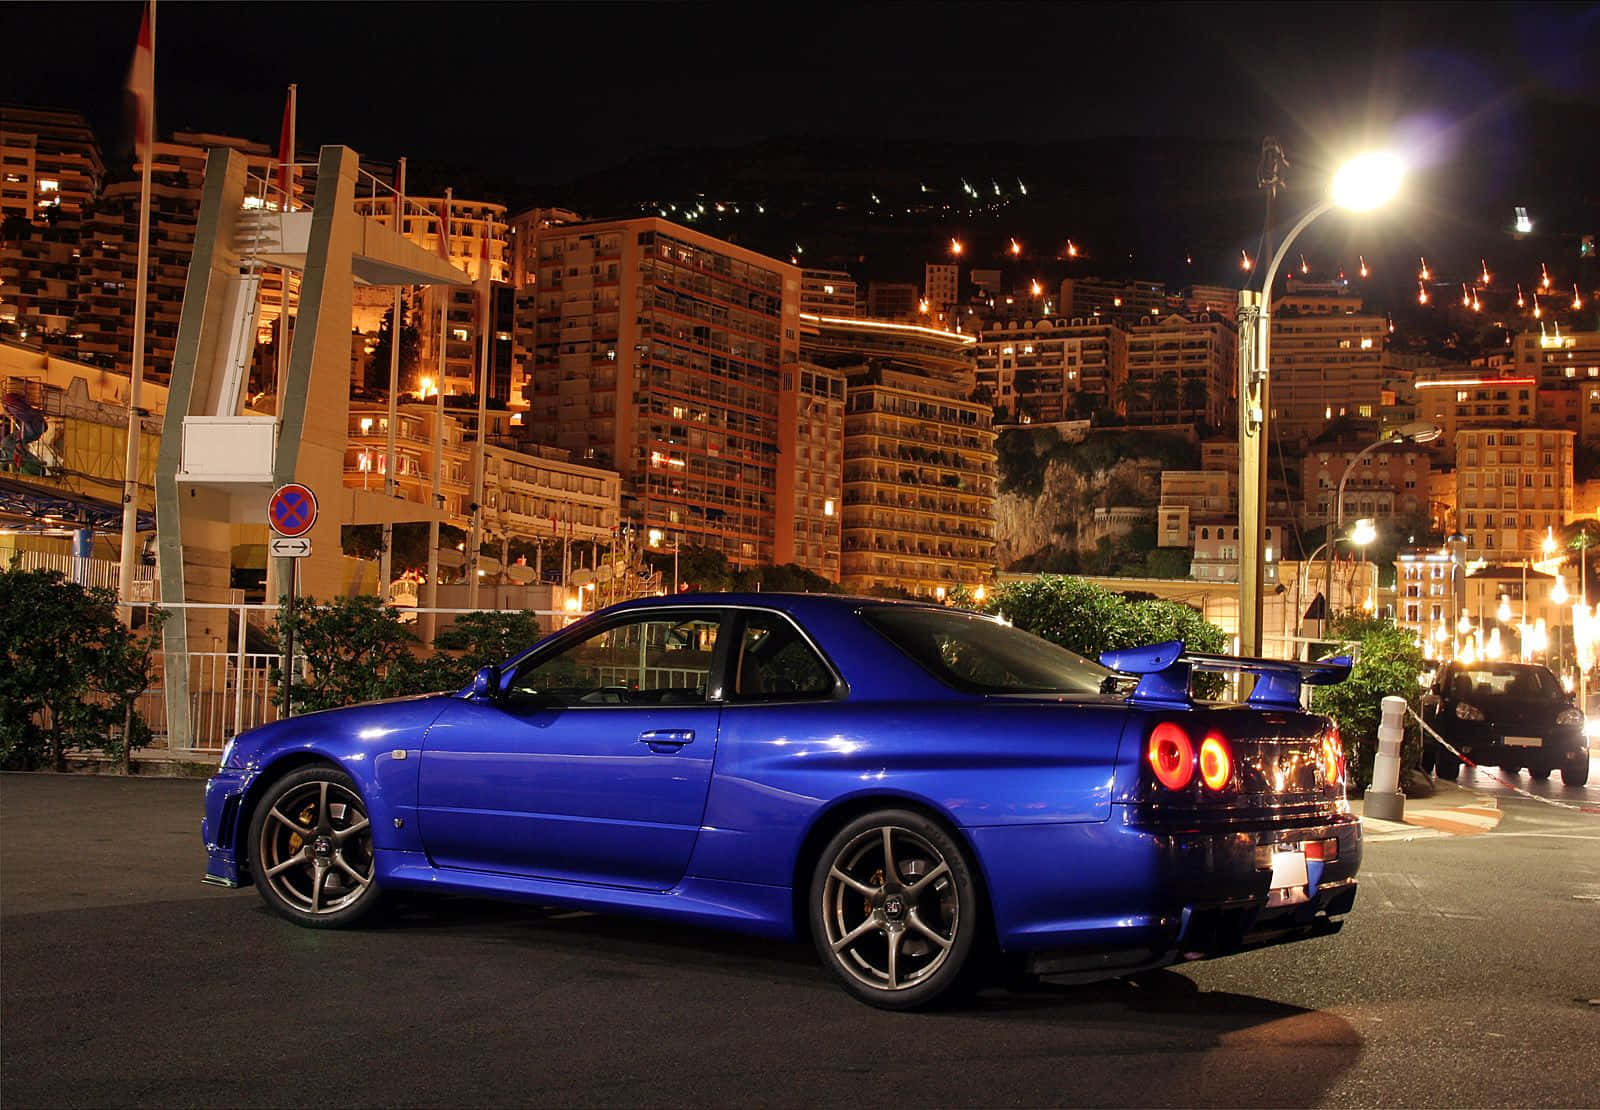 Zoom Off The Streets With The Cool Gtr! Background